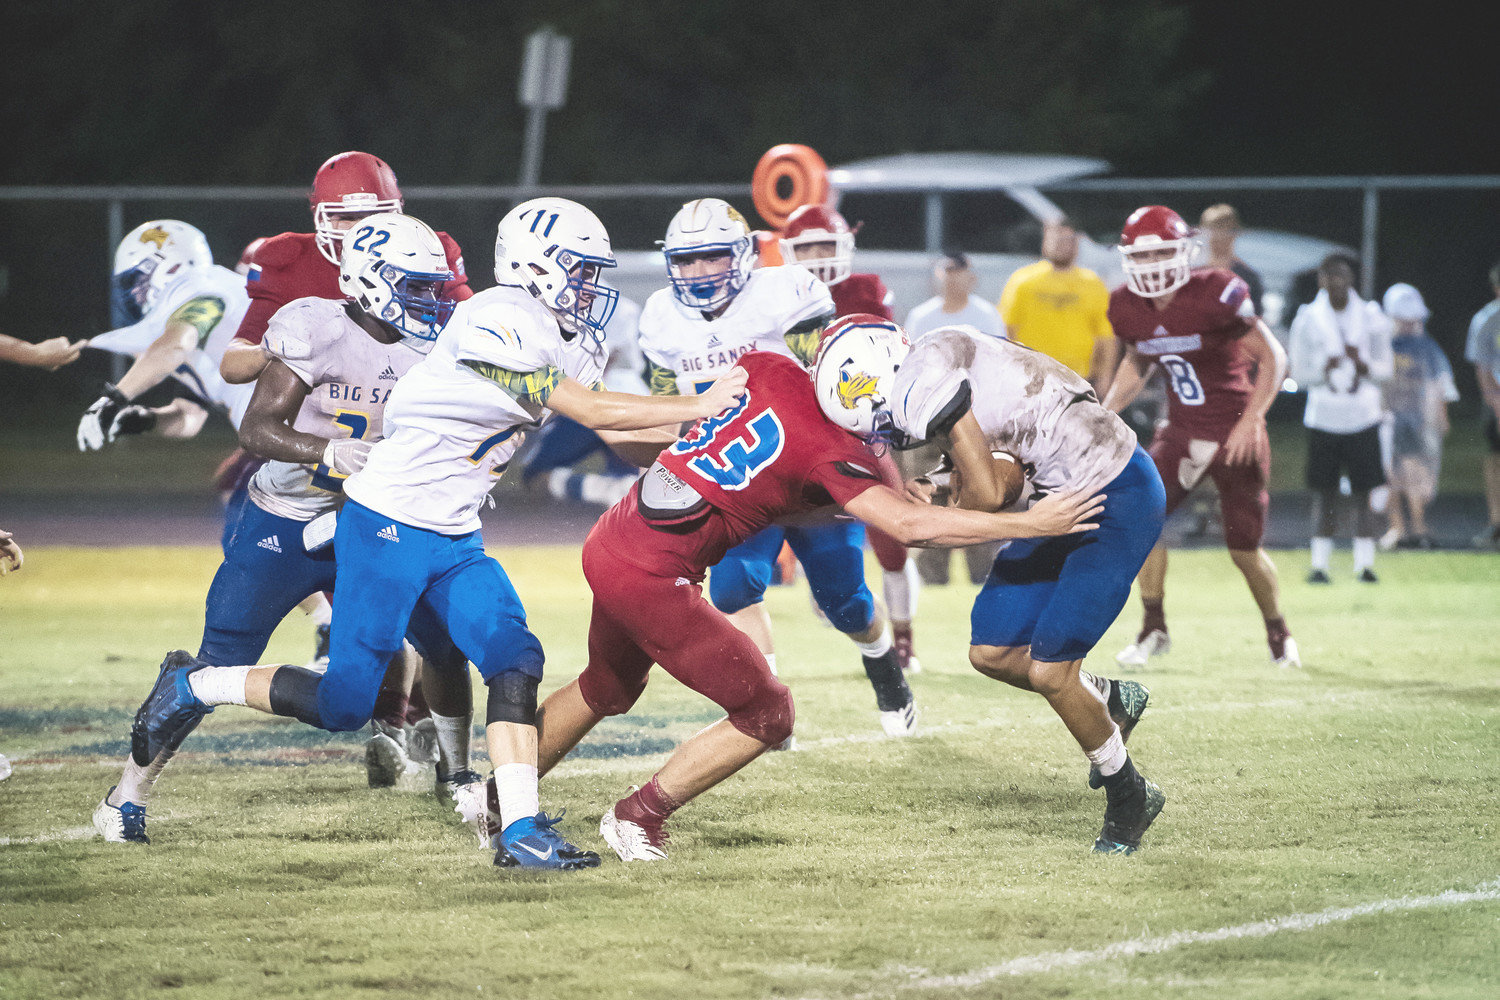 Alba-Golden’s Broedie Baker makes a big stop on a Big Sandy running back in Friday’s contest. The game was called at the half due to bad weather.